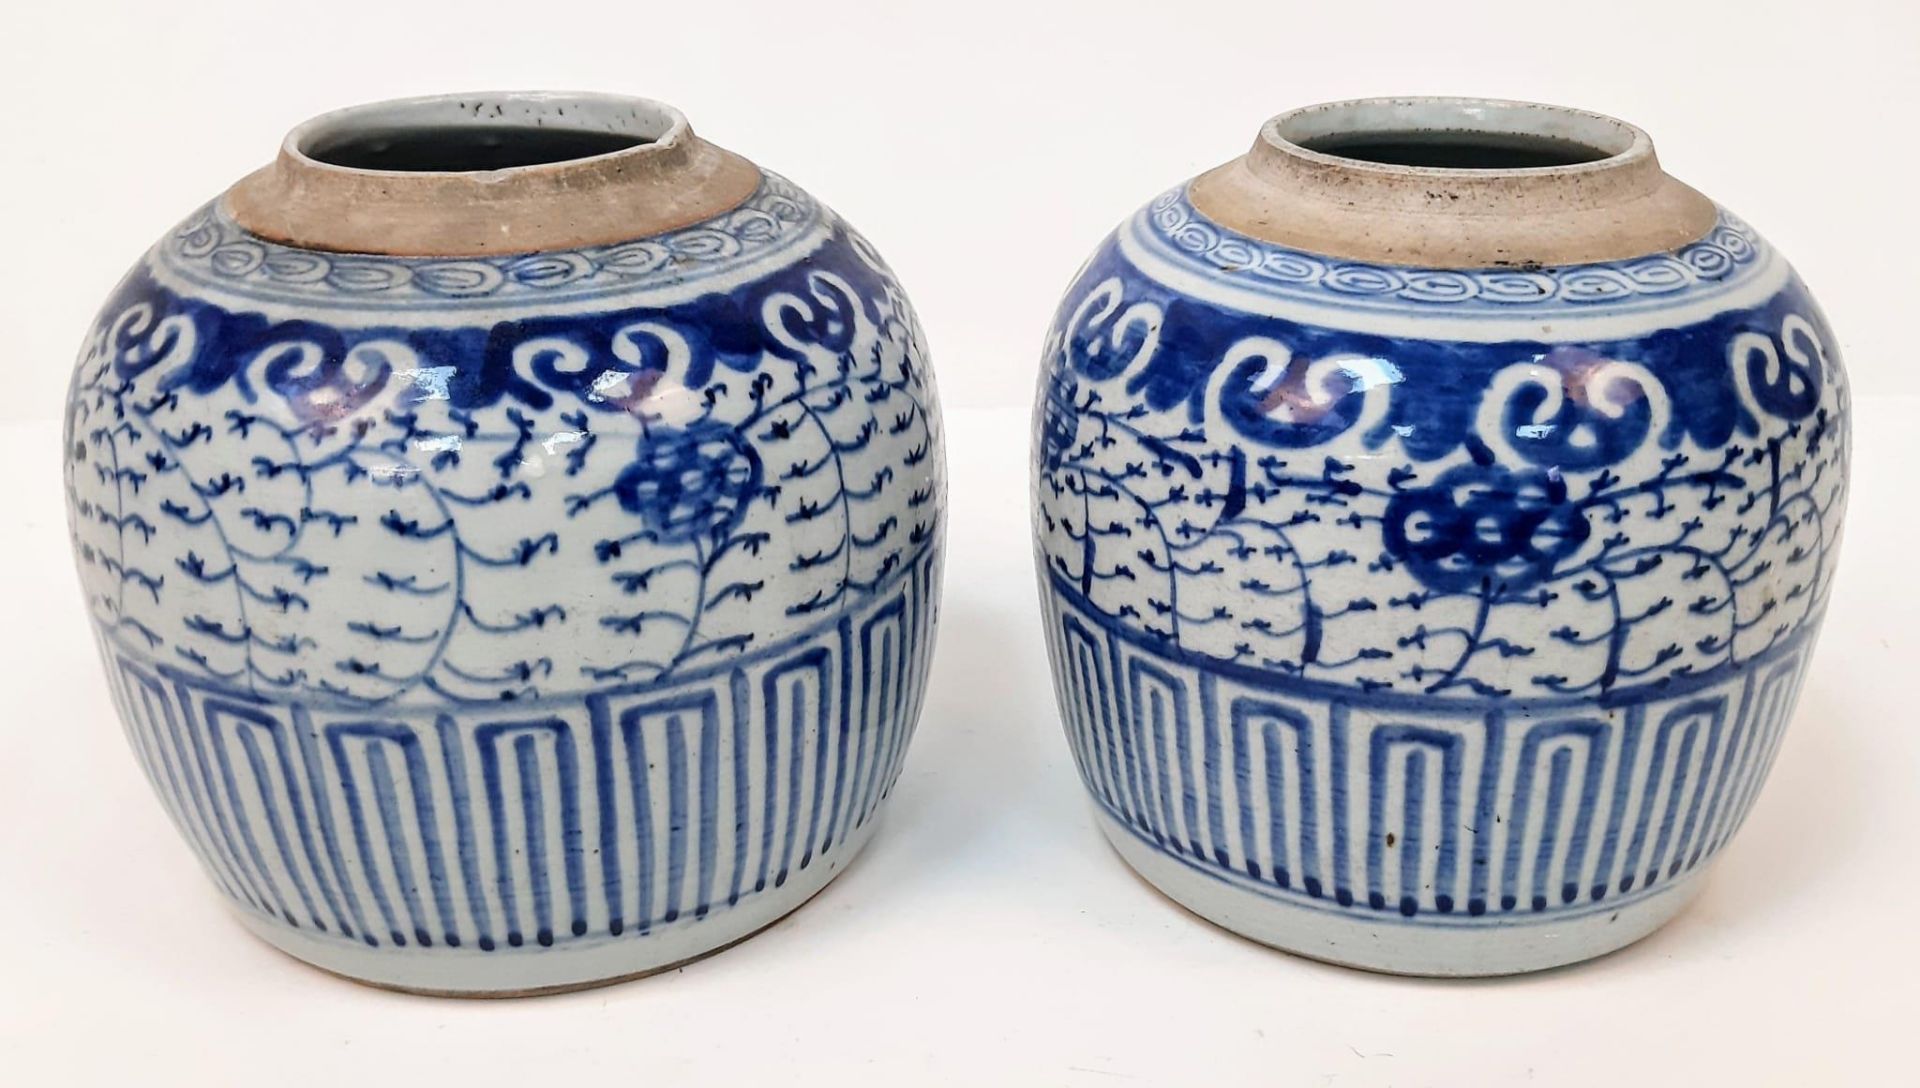 A PAIR OF LATE 19TH CENTURY BLEU GLAZED CHINESE POTS . 20cms TALL 22cms WIDTH (small chips at rim)